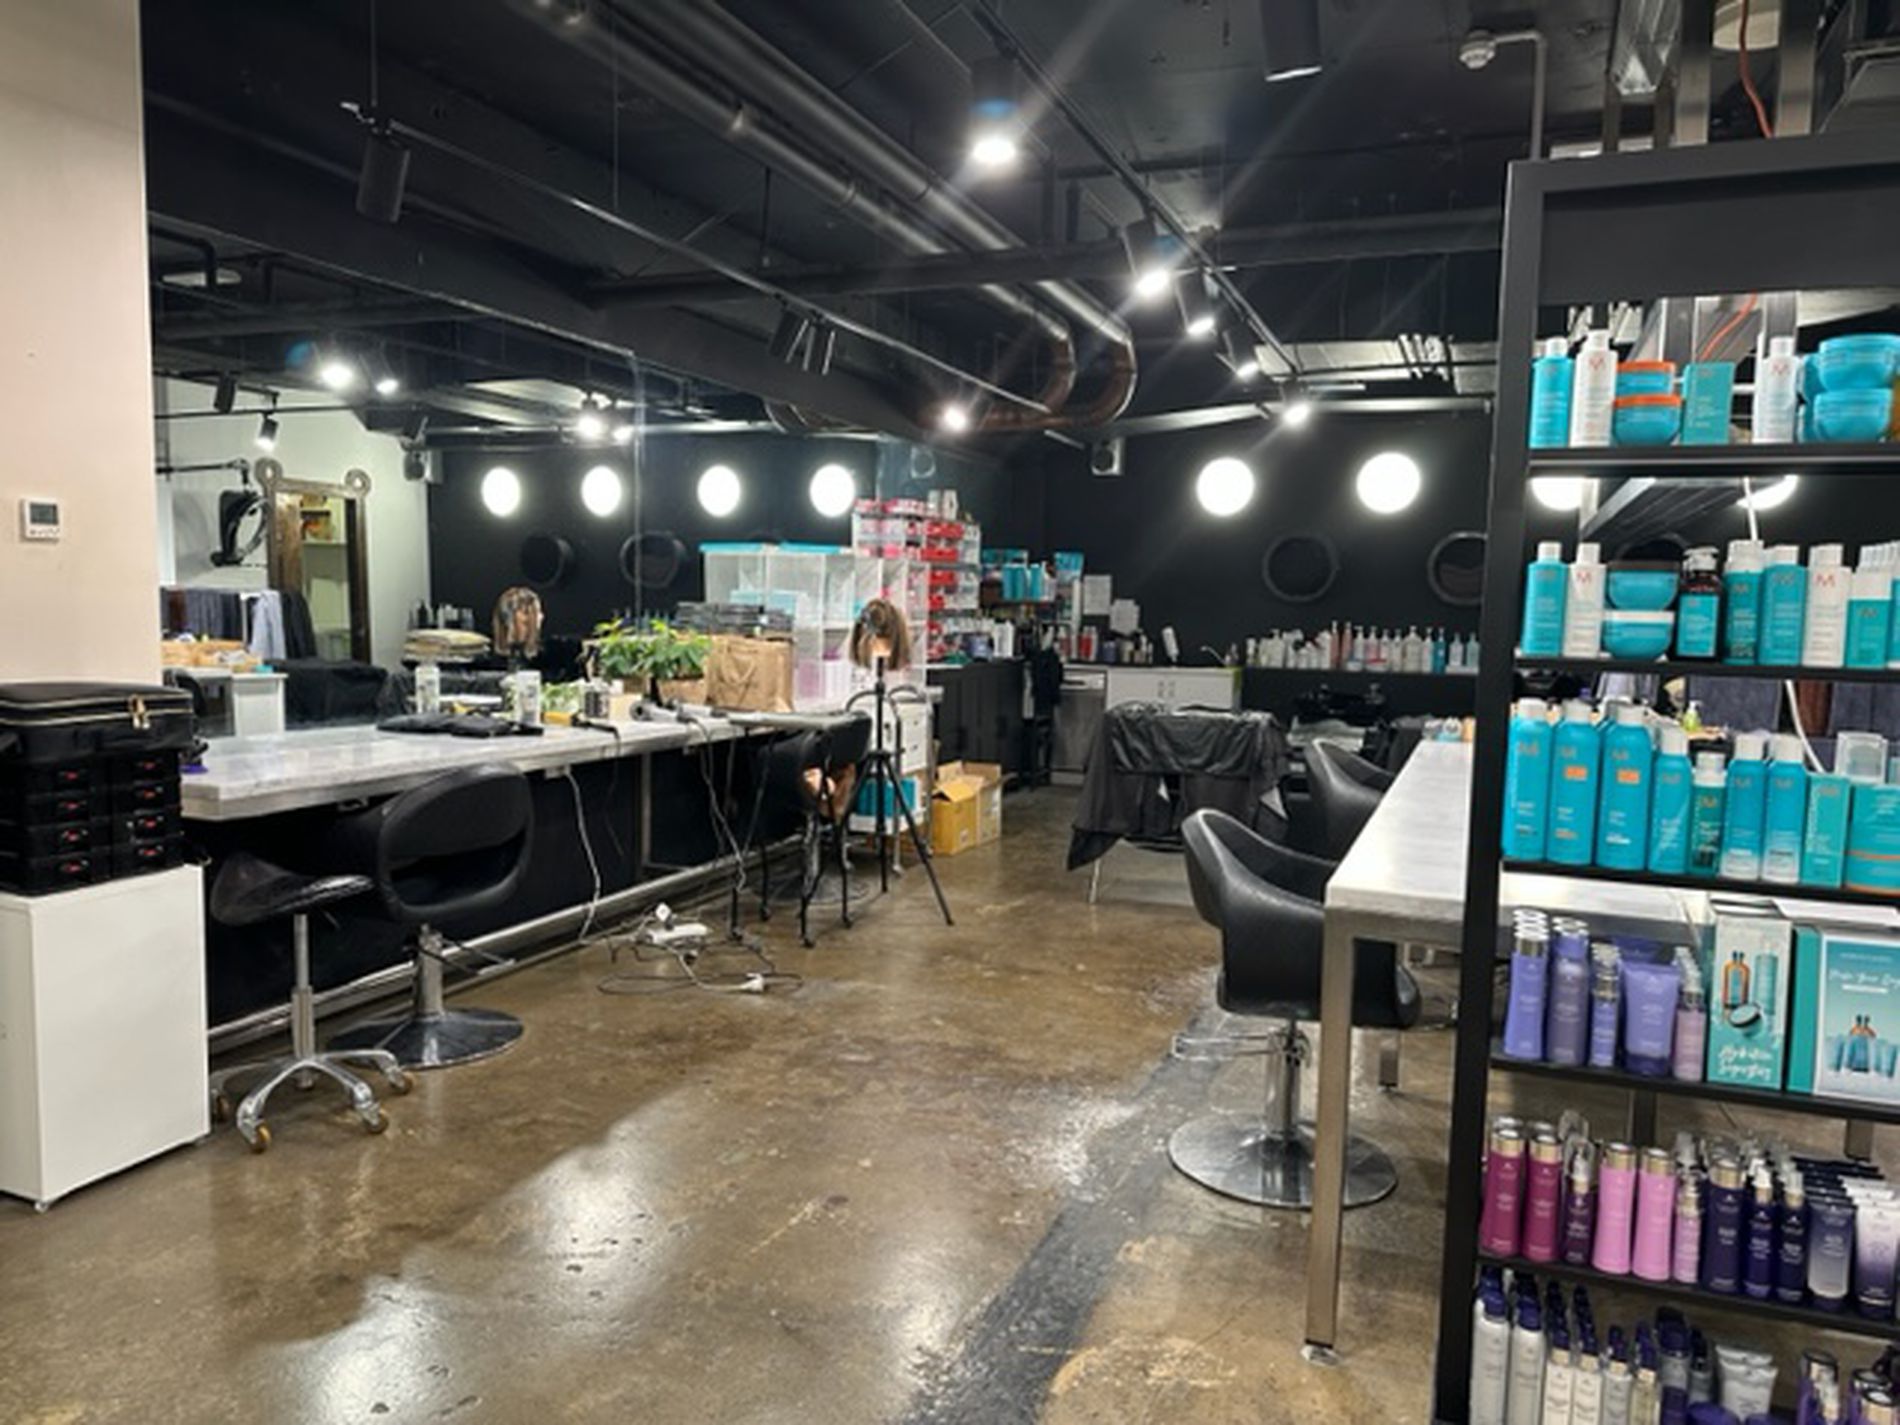 Hair and Make-Up Salon Business for Sale Toorak
